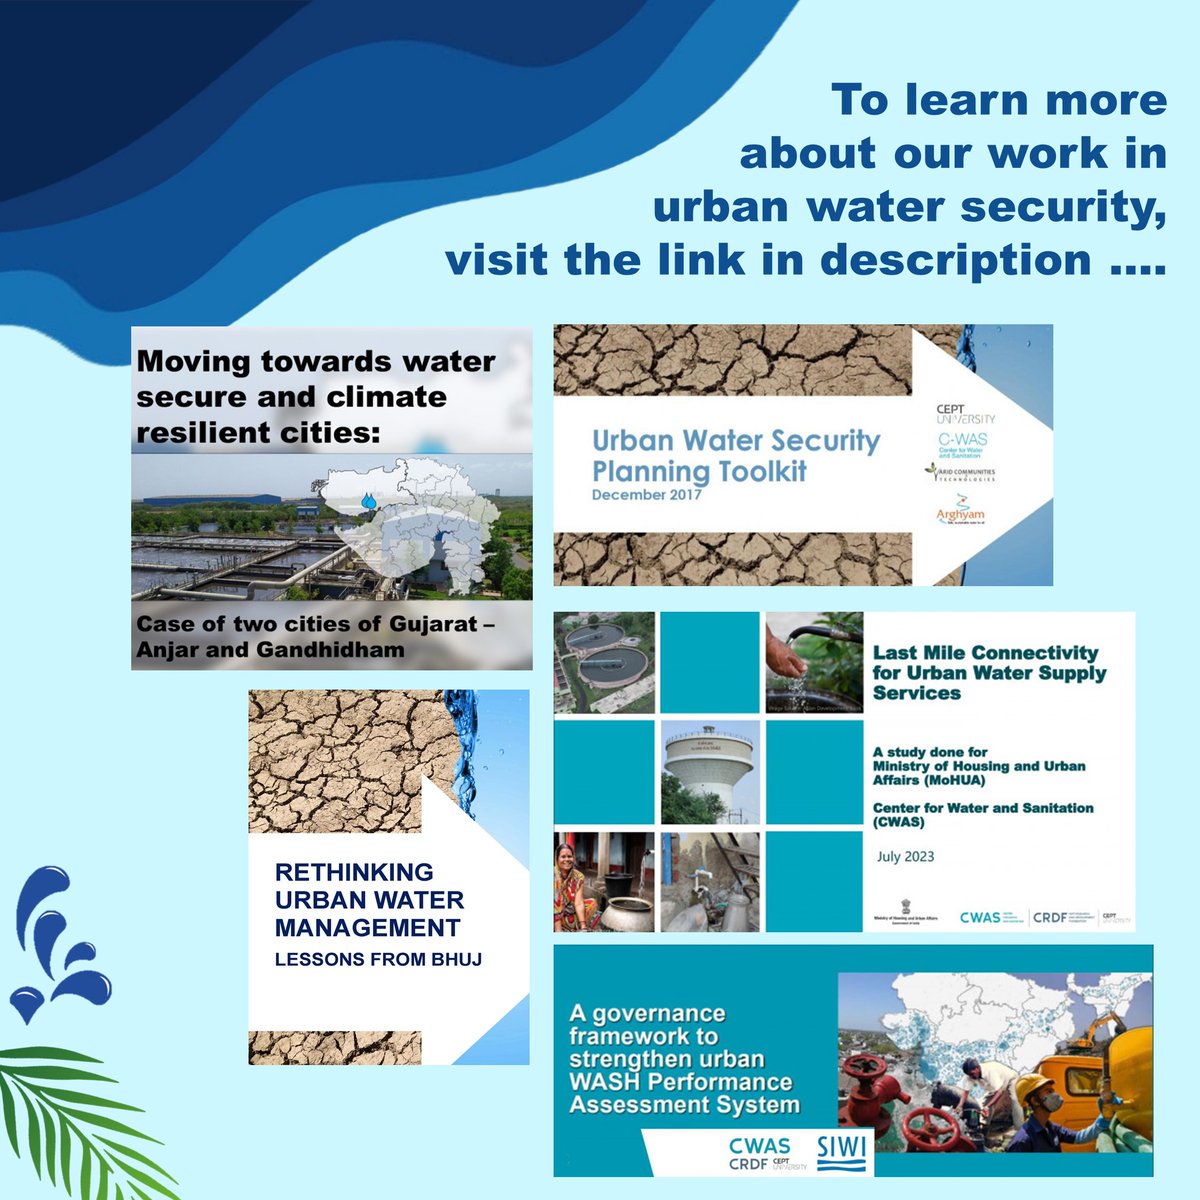 The climate crisis is a water crisis! Water security is critical for climate adaptation. This #WorldWaterDay we showcase some of our work on urban water security. To learn more, visit: cwas.org.in/cwas-resources…